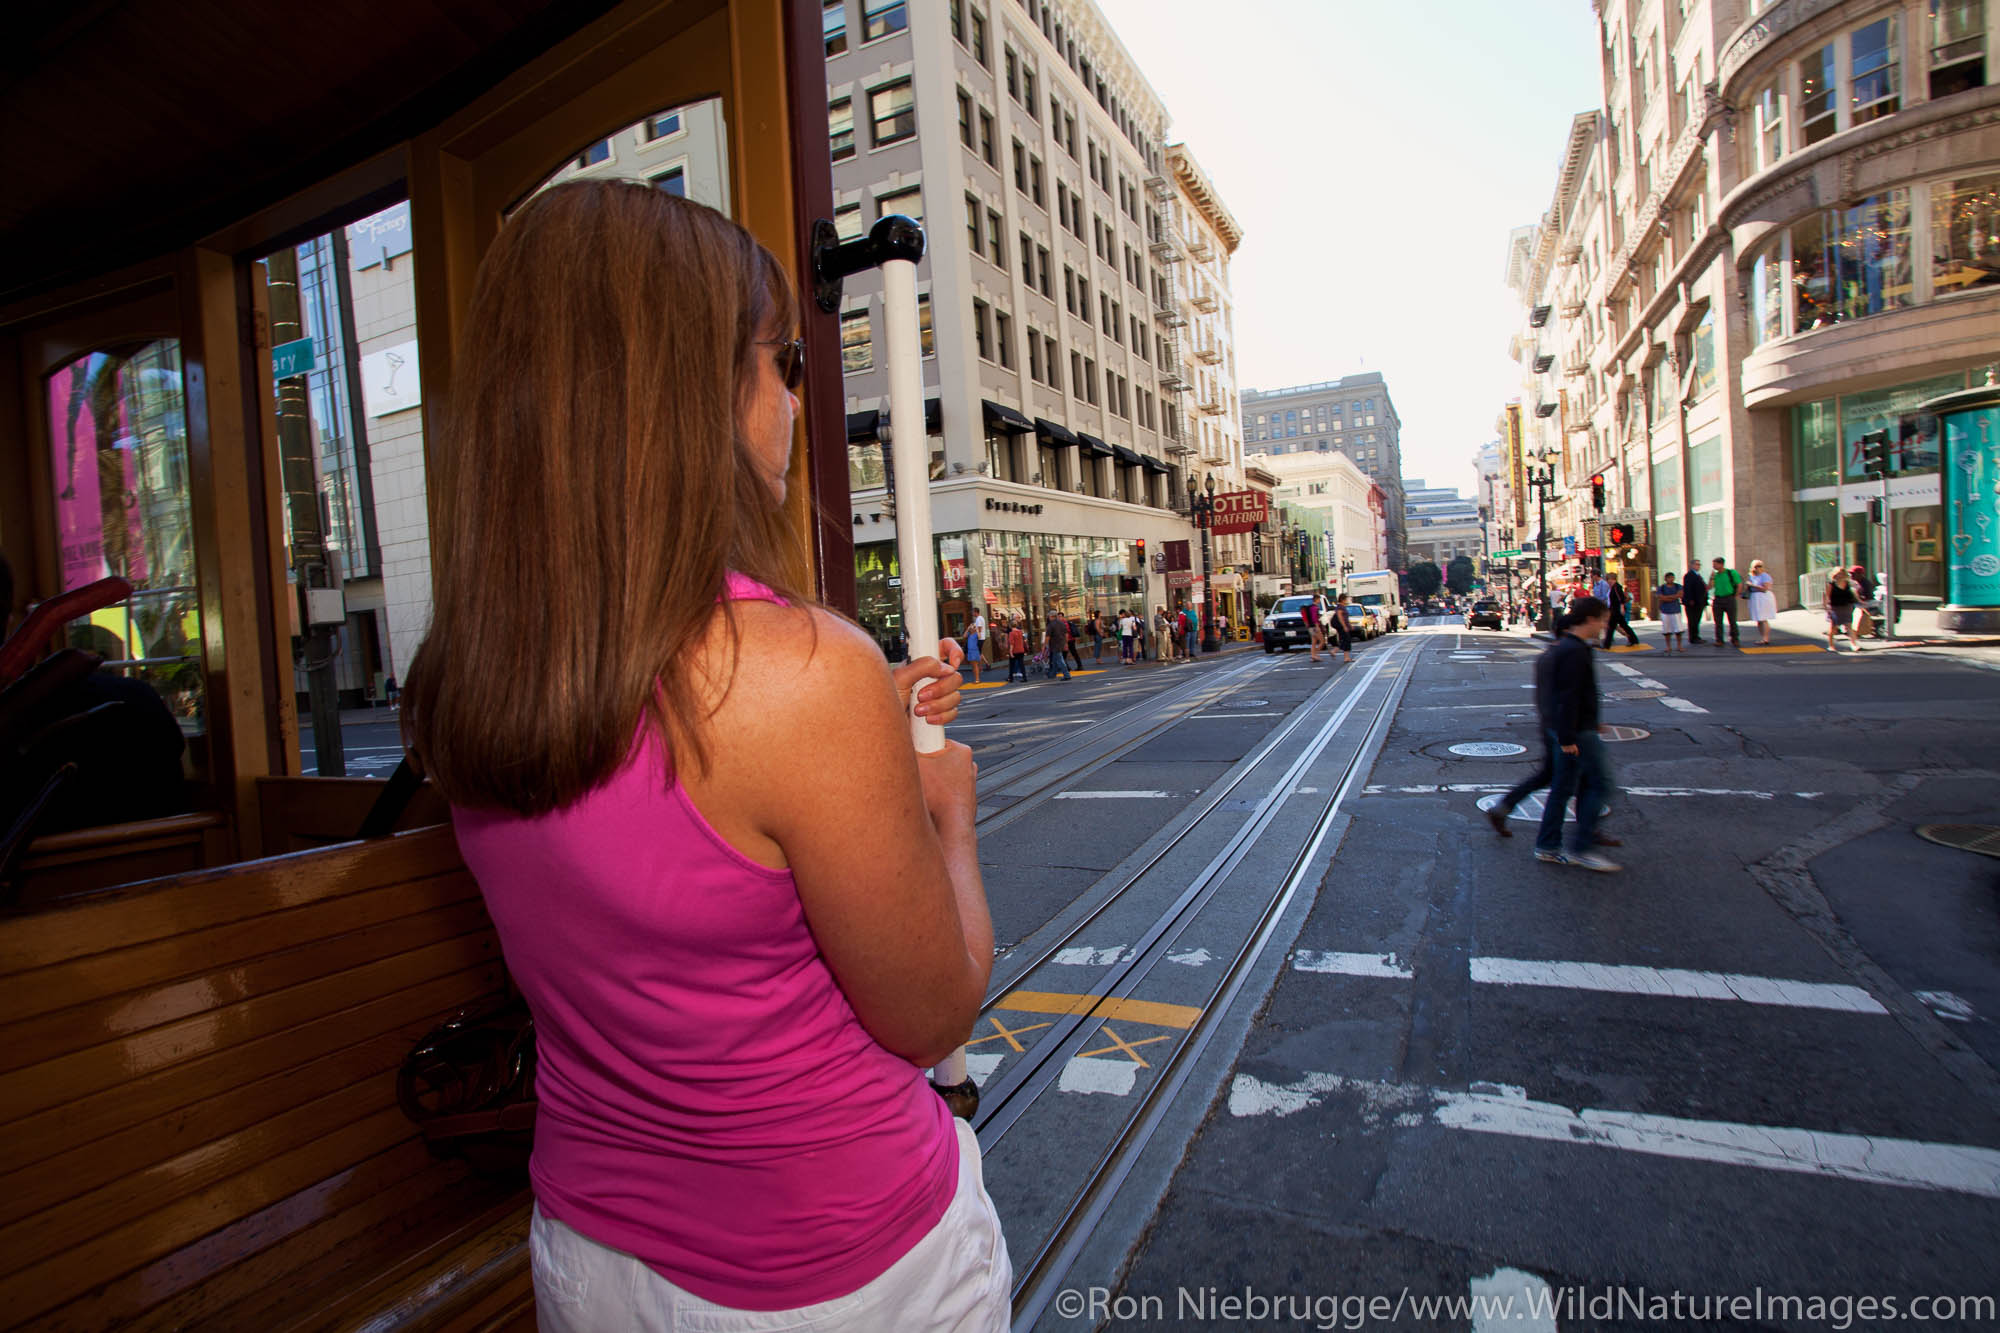 Riding the famous cable cars in San Francisco, CA (model released)